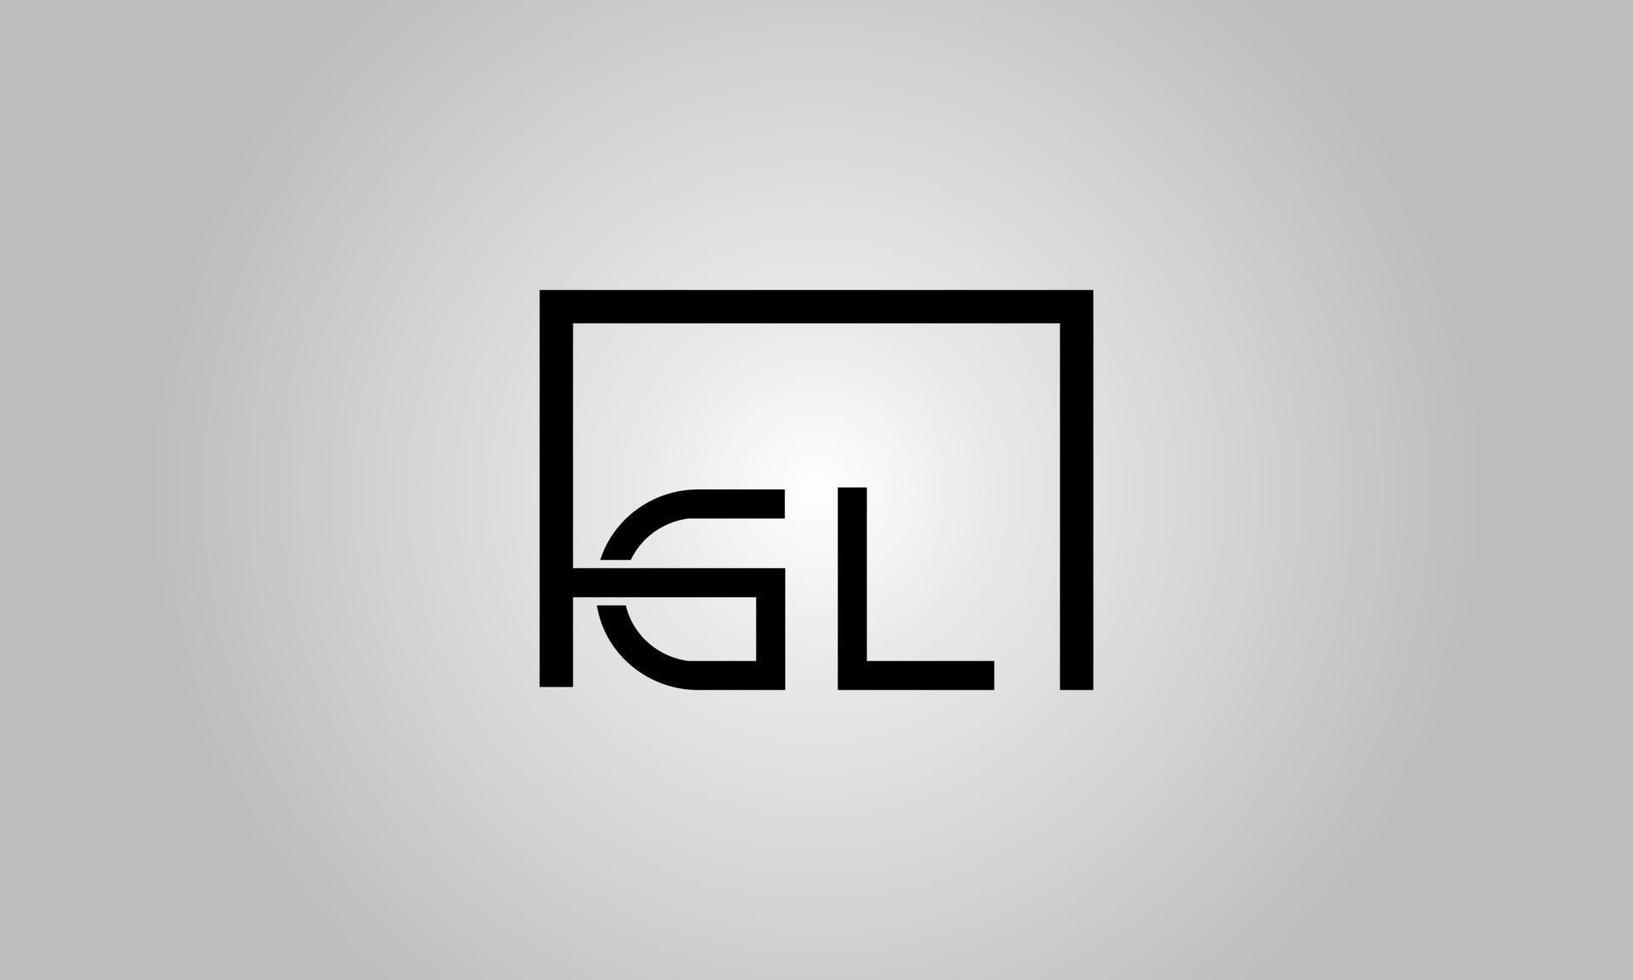 Letter GL logo design. GL logo with square shape in black colors vector free vector template.